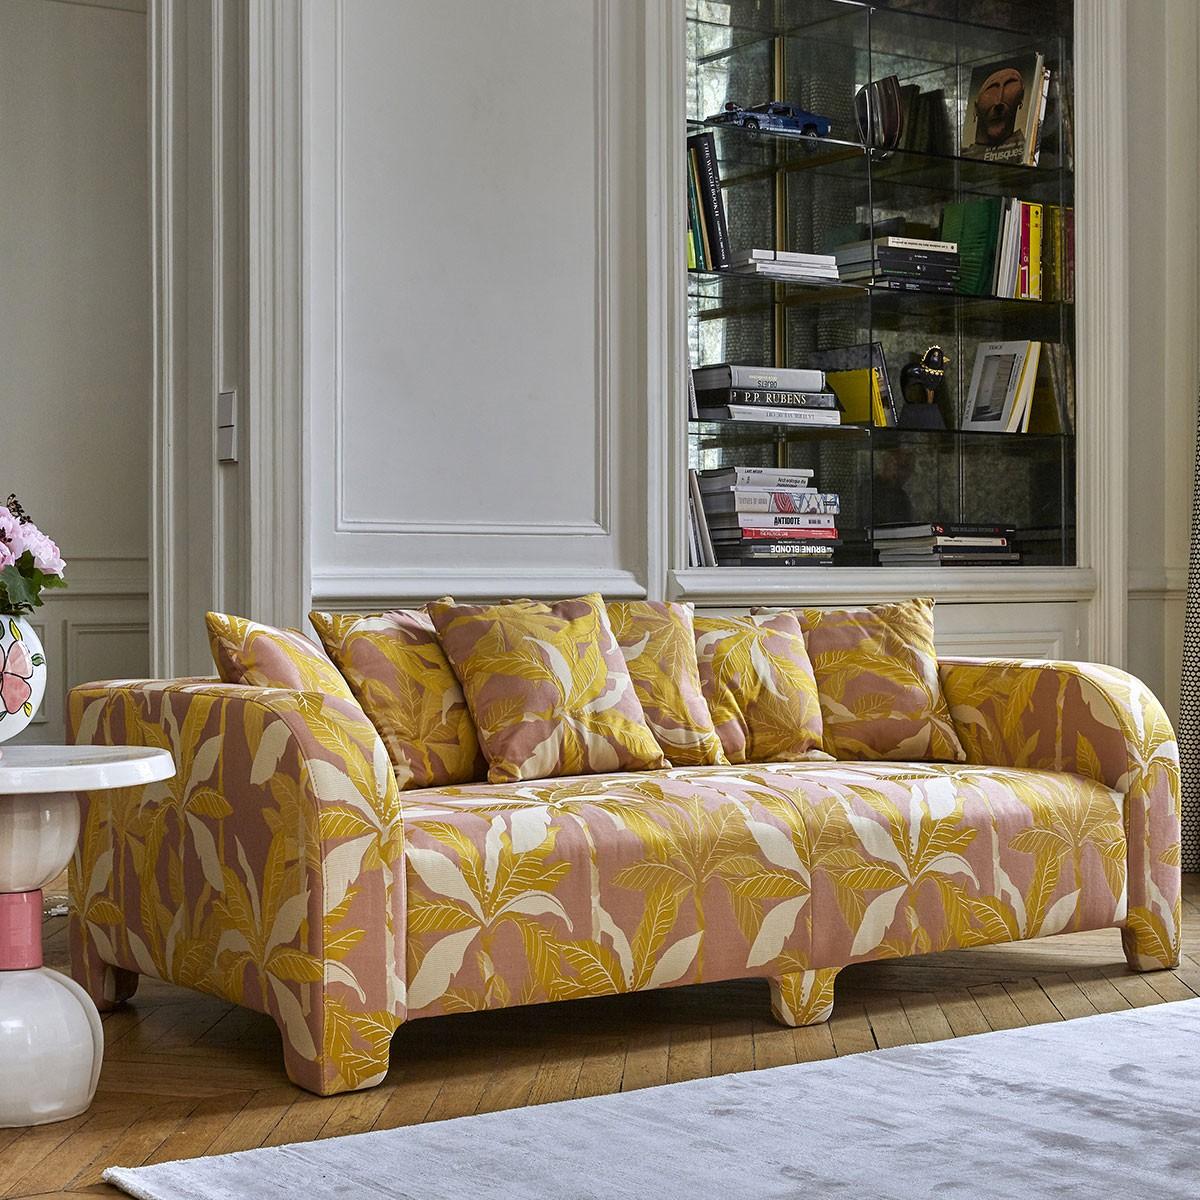 Popus Editions Graziella 2 seater sofa in saffron antwerp linen upholstery

A foot that hides another. A cushion that hides another. A curve that hides another with contemporary lines and a base like a punctuation mark, this sofa gives pride of